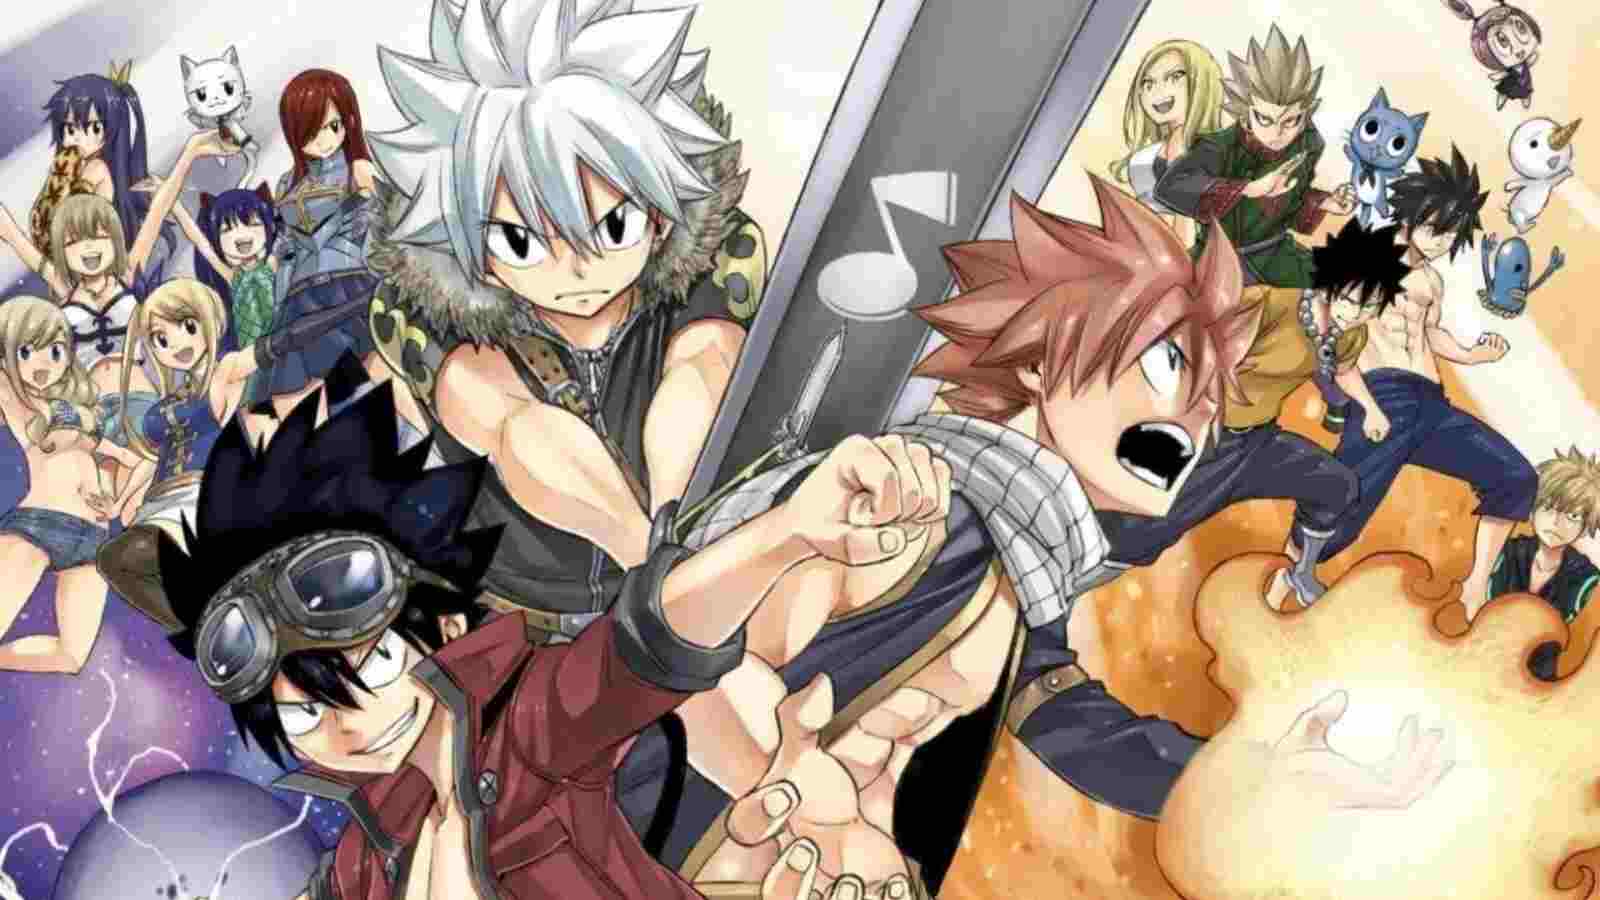 10 strongest characters in Fairy Tail ranked